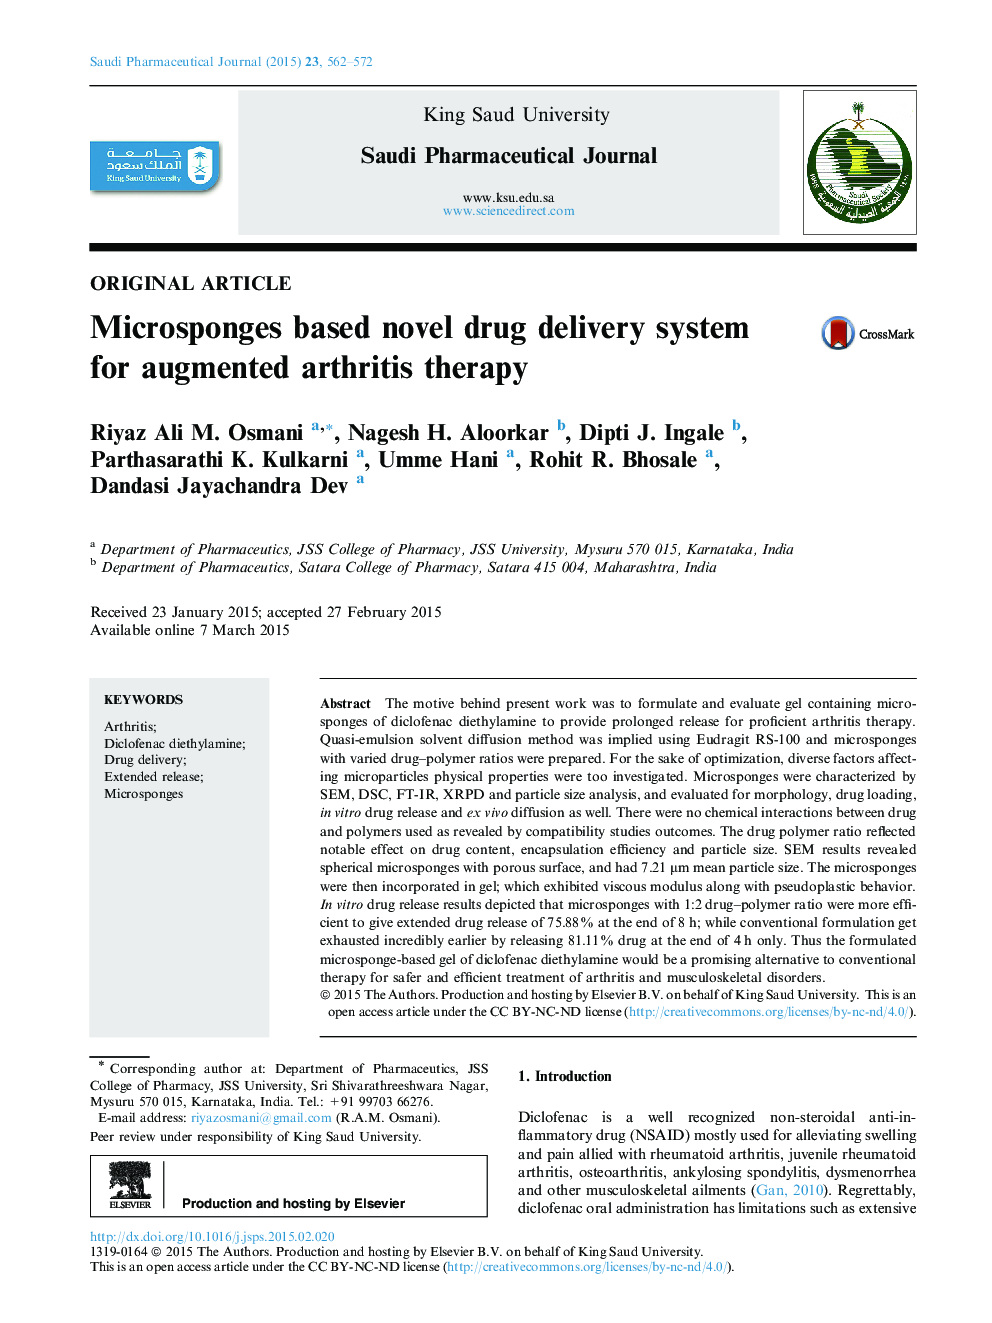 Microsponges based novel drug delivery system for augmented arthritis therapy 